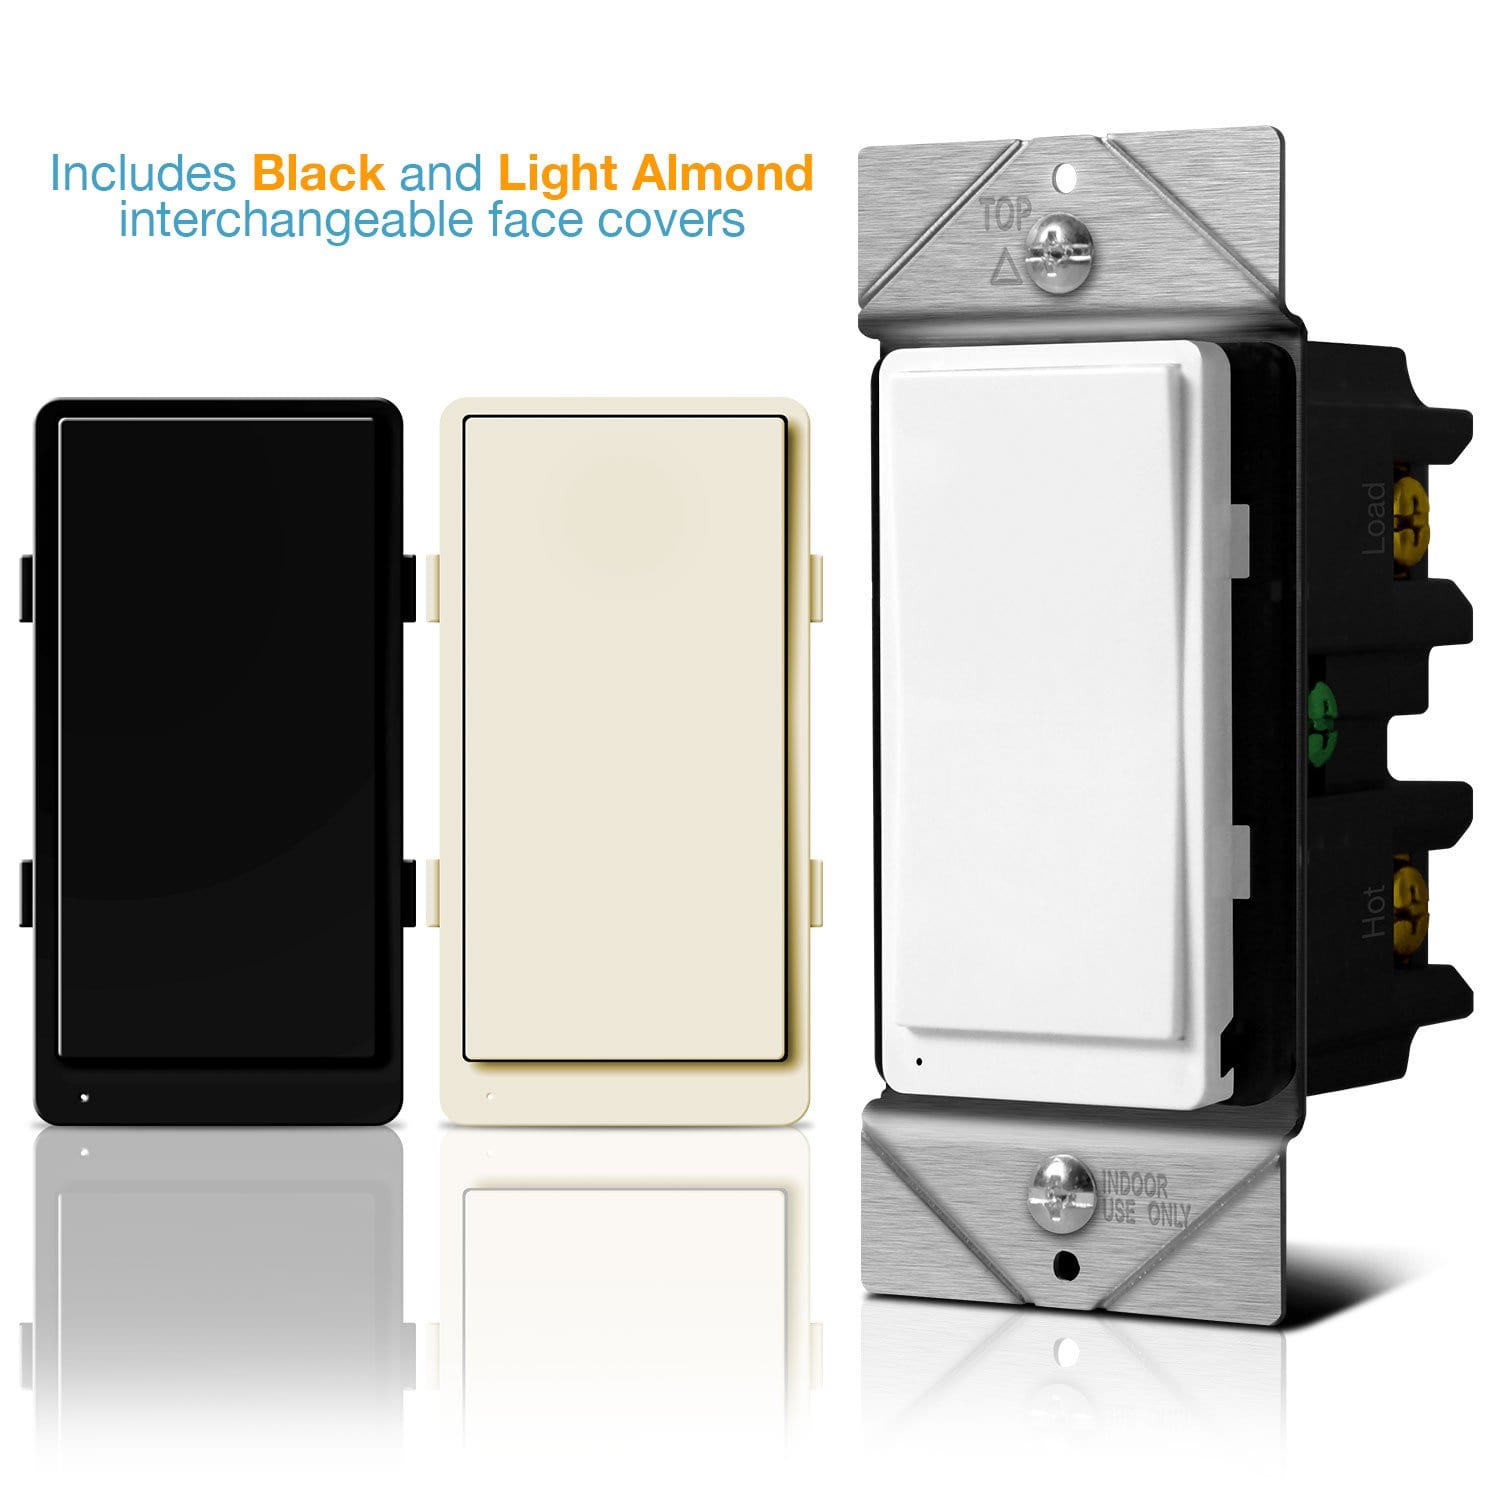 In-Wall Smart Z-Wave Light Switch with Energy Monitoring